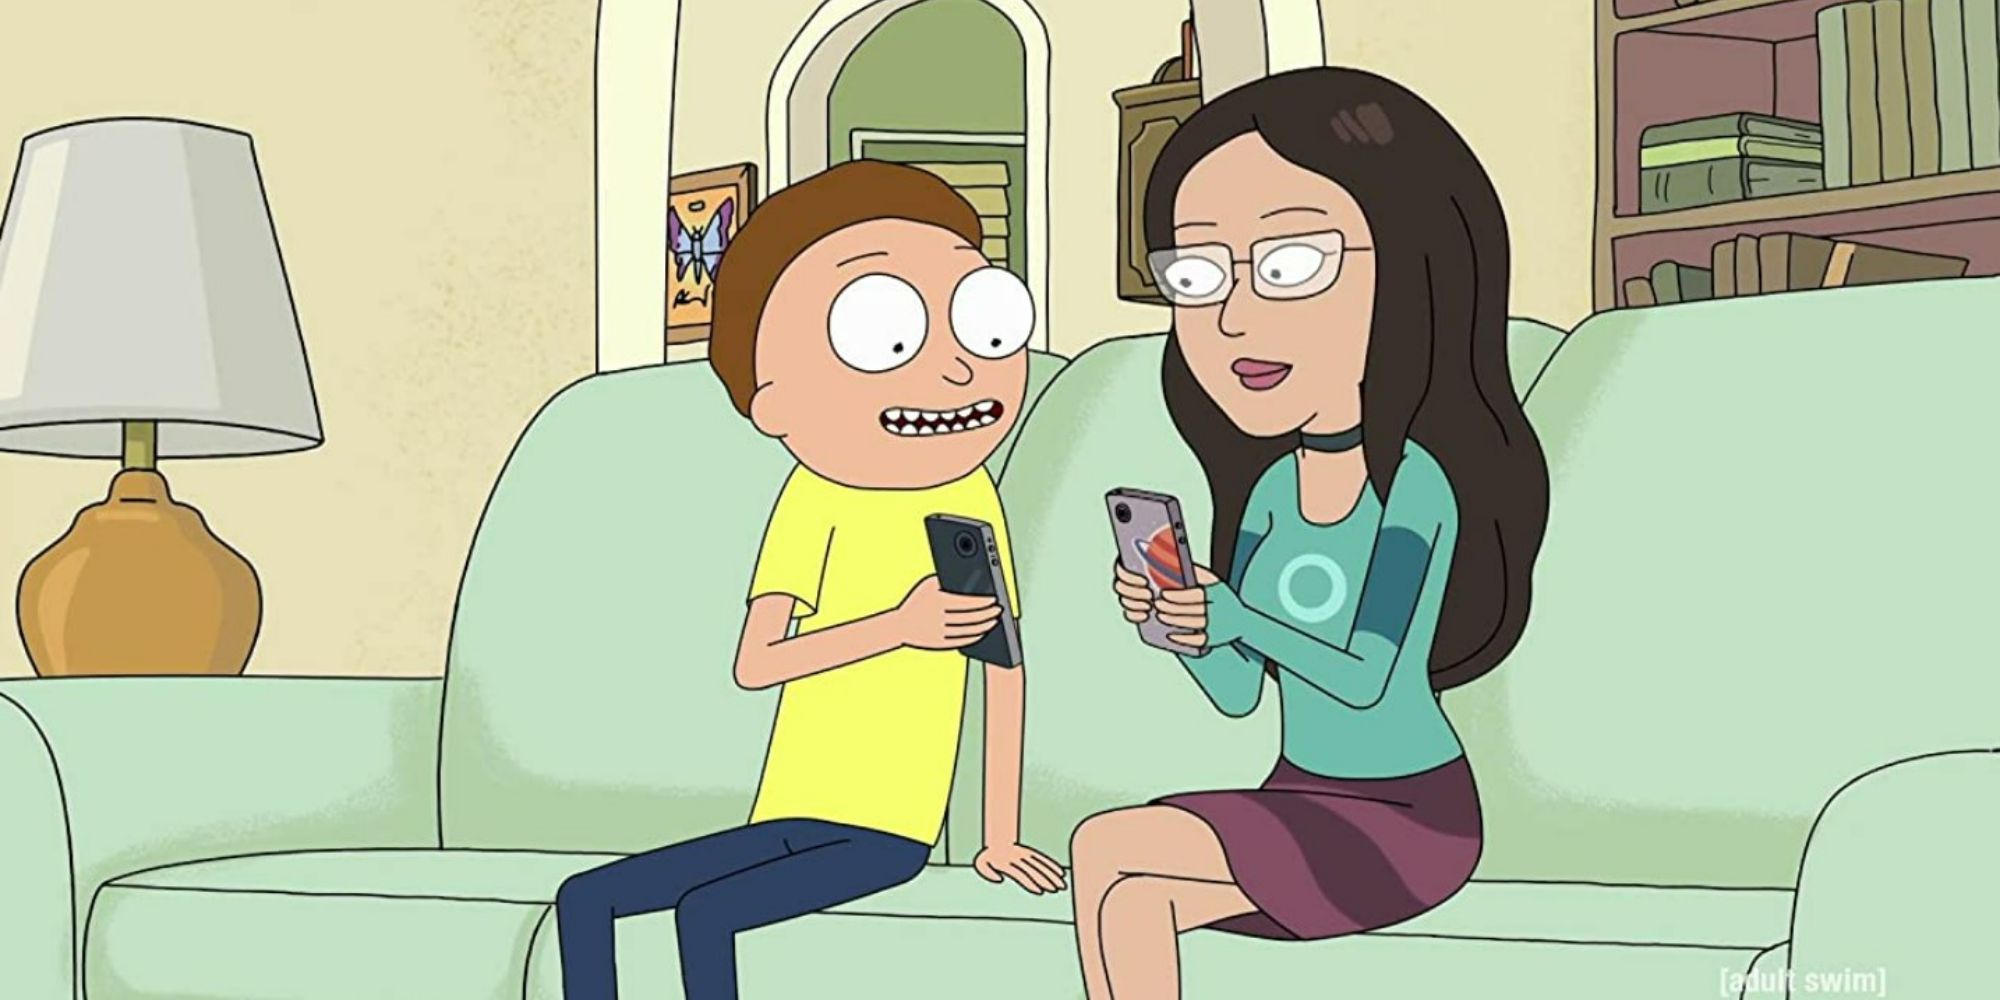 Morty and his girlfriend use their phones on the couch in Rick and Morty